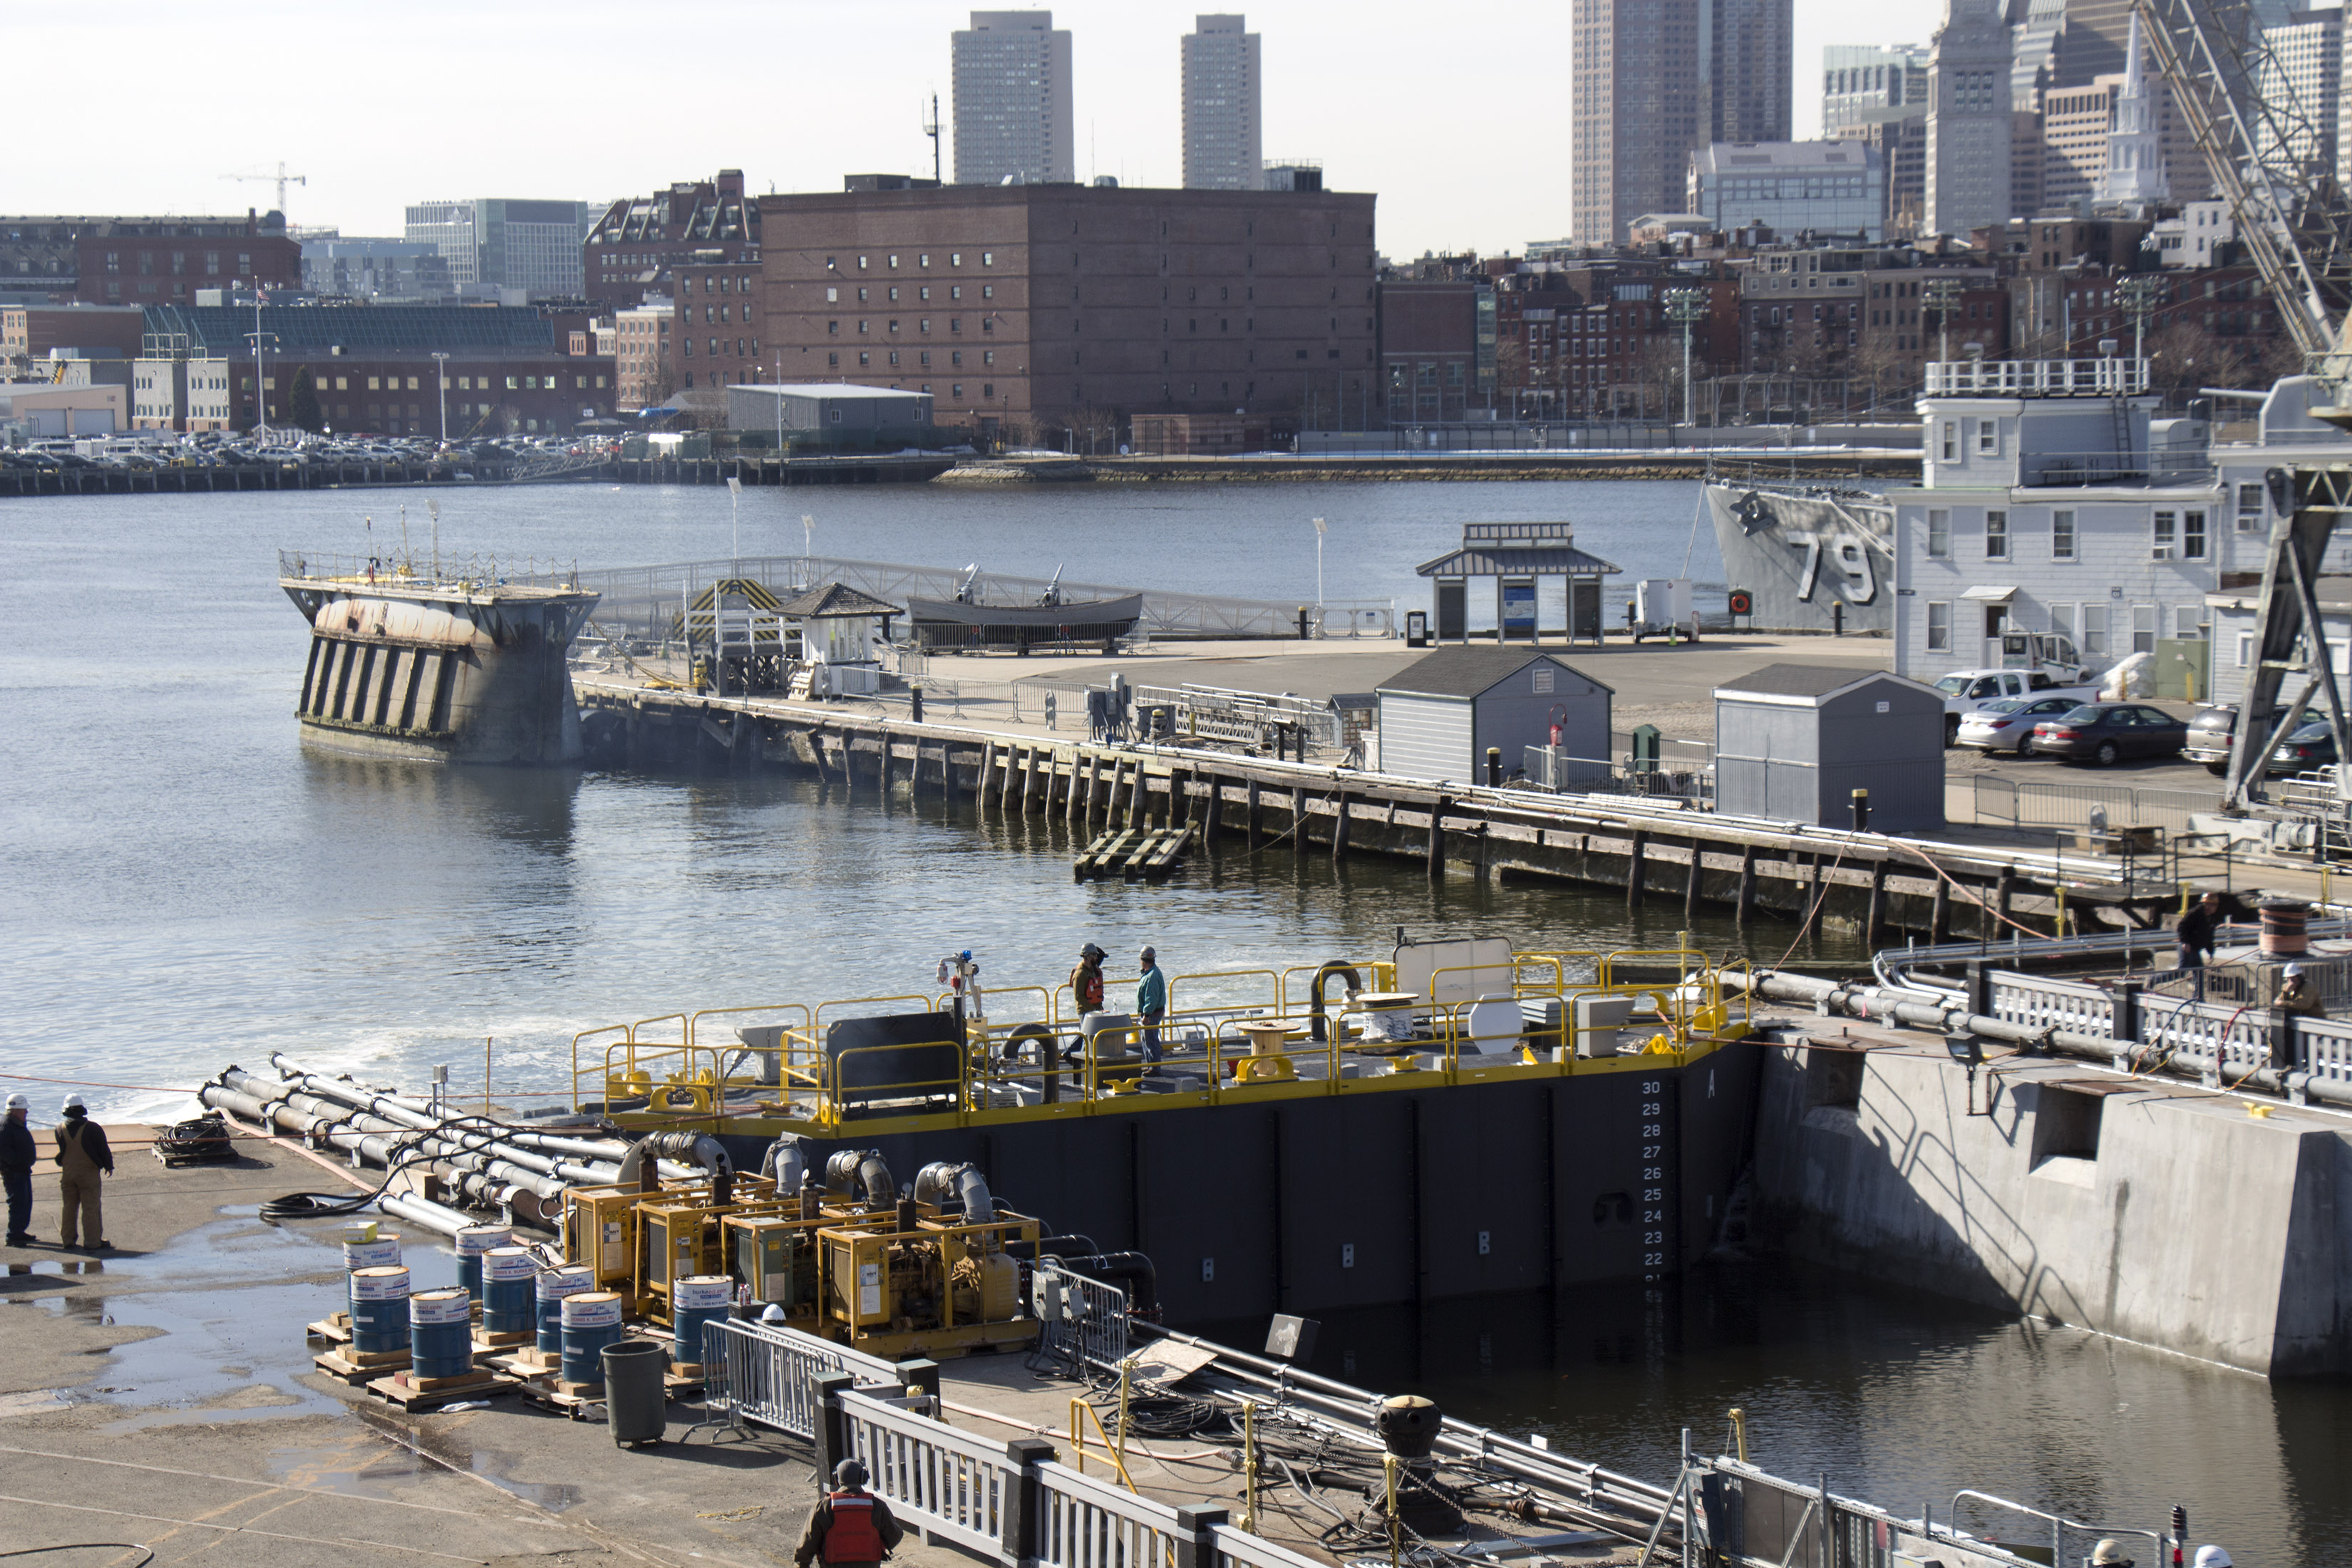 The new steel caisson is installed for testing in April 2015. The former caisson is tied up along the pier in the background. [Courtesy USS Constitution Museum]